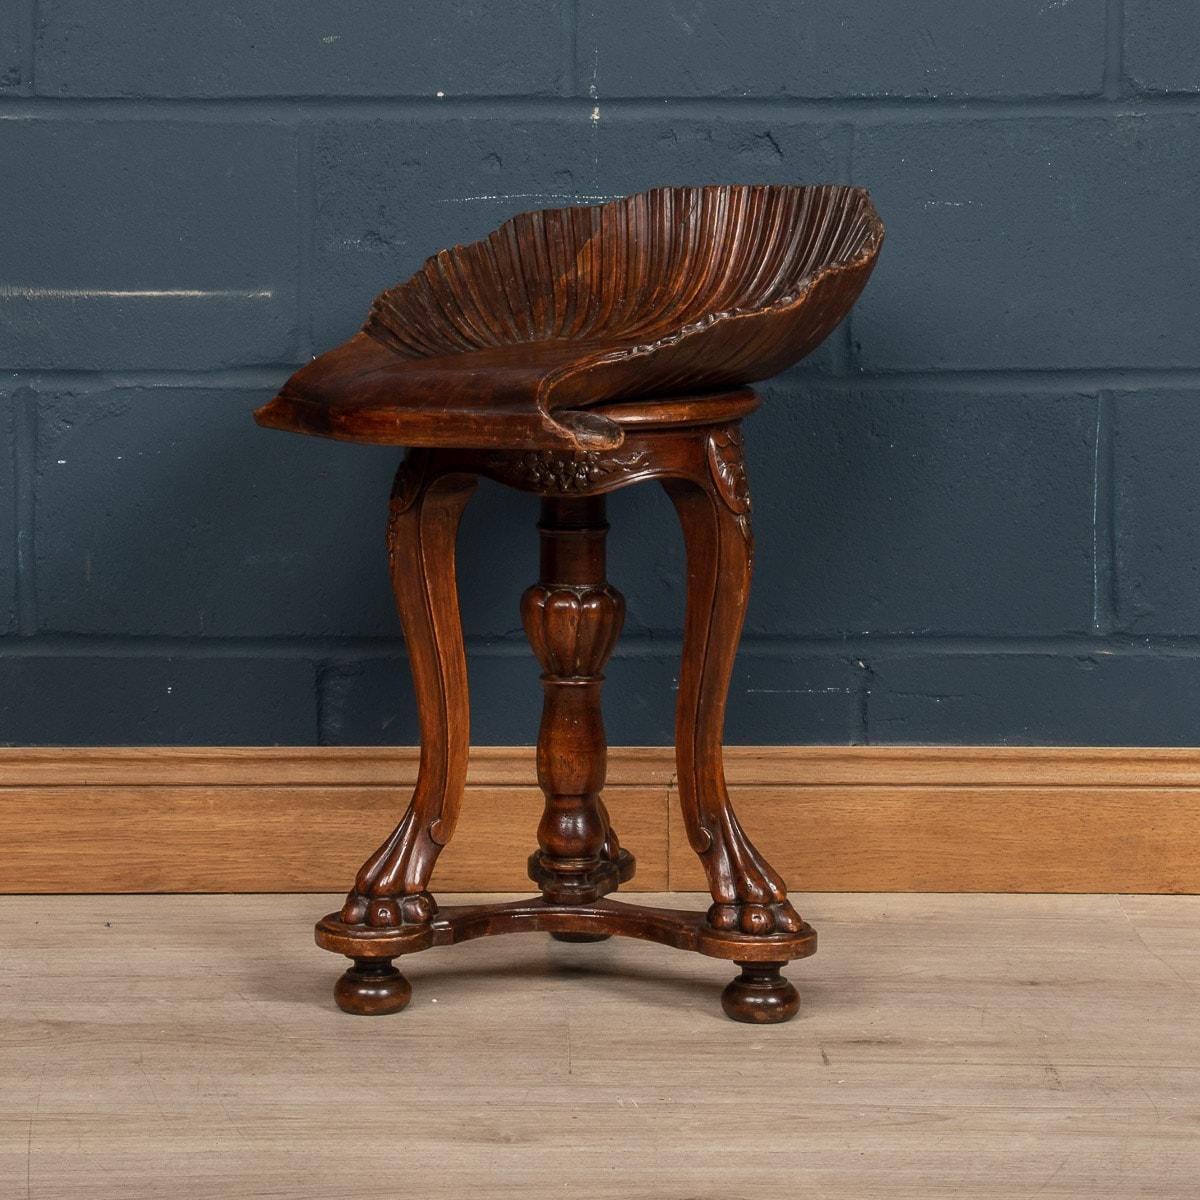 A beautiful carved antique fruitwood grotto stool, the bench standing on cabriole legs joined with a bottom stretcher, and bun feet reminiscent of animal paws, made in Venice around the turn of the 19th century. The seat has a 